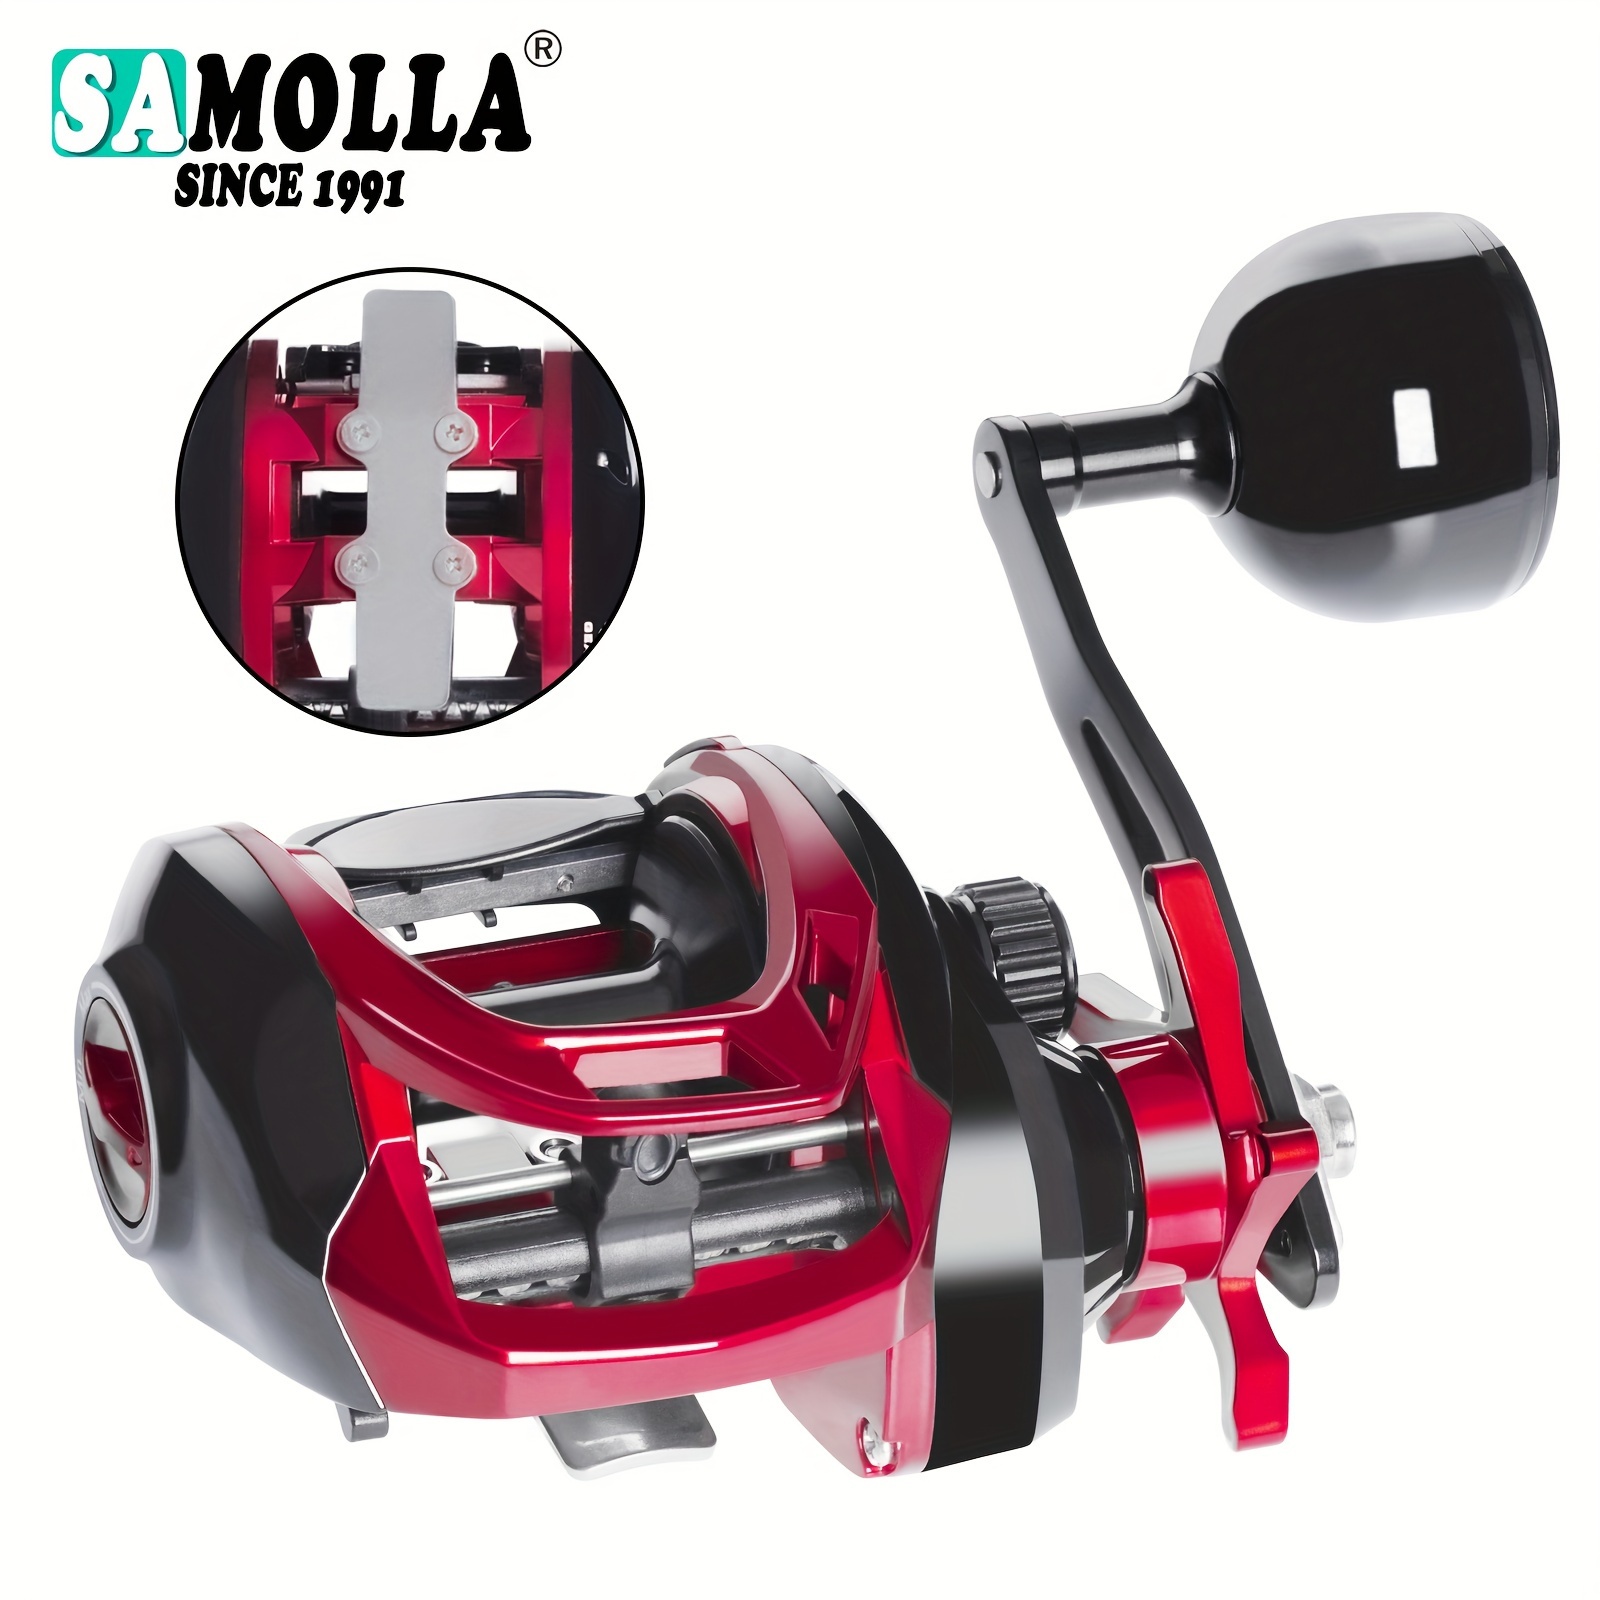 1pc 6.3:1 Gear Ratio Baitcasting Reel, Trolling Fishing Reels With 33.07LB  Max Drag, Fishing Tackle For Saltwater